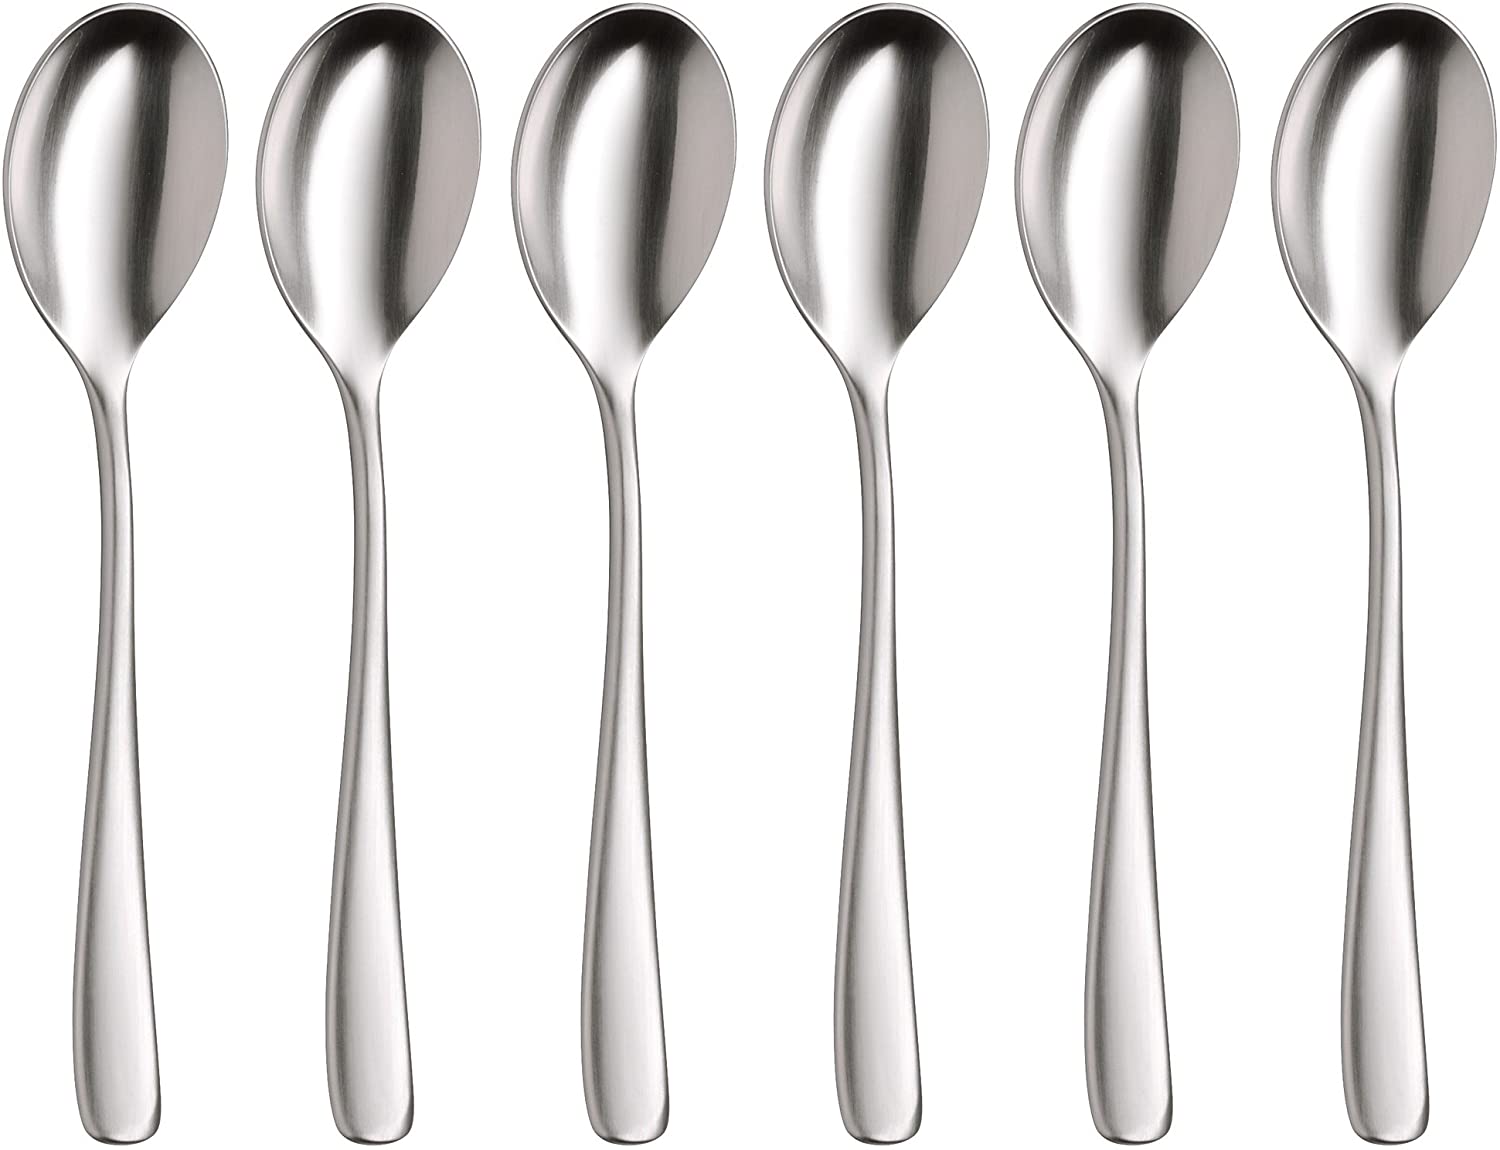 WMF Vision 1271966330 Espresso Spoons Cromargan Protect Stainless Steel Set of 6